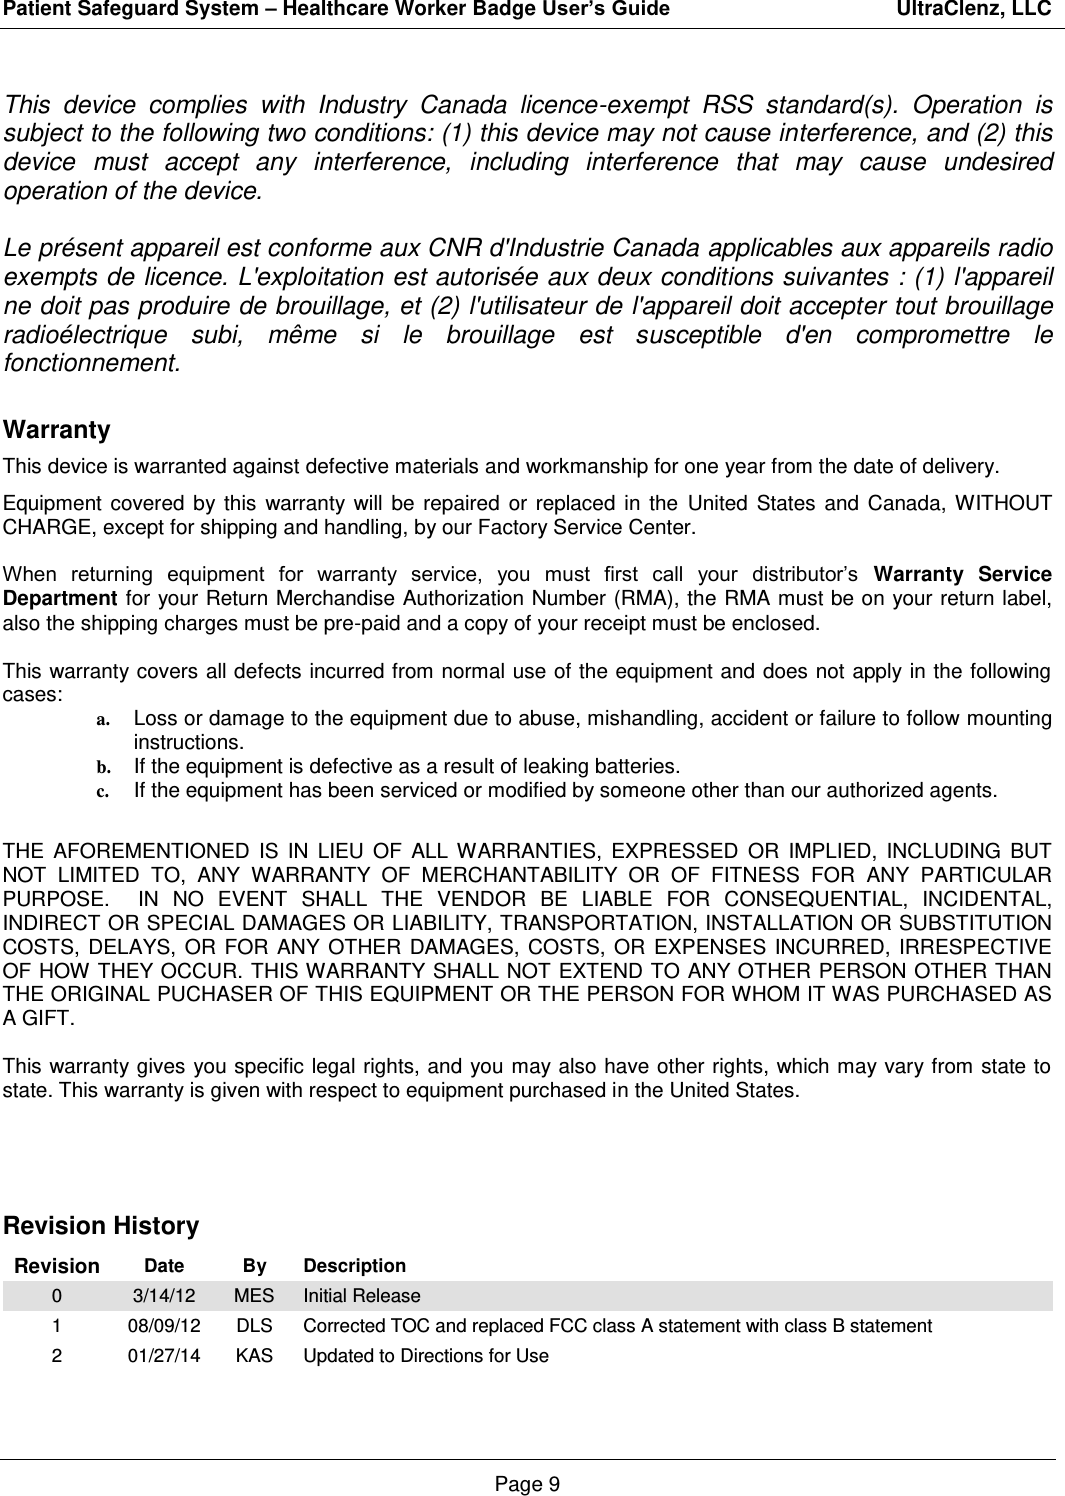 Patient Safeguard System – Healthcare Worker Badge User’s Guide                                       UltraClenz, LLC Page 9  This  device  complies  with  Industry  Canada  licence-exempt  RSS  standard(s).  Operation  is subject to the following two conditions: (1) this device may not cause interference, and (2) this device  must  accept  any  interference,  including  interference  that  may  cause  undesired operation of the device.   Le présent appareil est conforme aux CNR d&apos;Industrie Canada applicables aux appareils radio exempts de licence. L&apos;exploitation est autorisée aux deux conditions suivantes : (1) l&apos;appareil ne doit pas produire de brouillage, et (2) l&apos;utilisateur de l&apos;appareil doit accepter tout brouillage radioélectrique  subi,  même  si  le  brouillage  est  susceptible  d&apos;en  compromettre  le fonctionnement. Warranty This device is warranted against defective materials and workmanship for one year from the date of delivery. Equipment  covered  by  this  warranty  will  be  repaired  or  replaced  in  the  United  States  and  Canada,  WITHOUT CHARGE, except for shipping and handling, by our Factory Service Center.  When  returning  equipment  for  warranty  service,  you  must  first  call  your  distributor’s  Warranty Service Department for your Return Merchandise Authorization Number (RMA), the RMA must be on your return label, also the shipping charges must be pre-paid and a copy of your receipt must be enclosed.  This warranty covers all defects incurred from normal use of the equipment and does not apply in the following cases: a. Loss or damage to the equipment due to abuse, mishandling, accident or failure to follow mounting instructions. b. If the equipment is defective as a result of leaking batteries. c. If the equipment has been serviced or modified by someone other than our authorized agents.  THE  AFOREMENTIONED  IS  IN  LIEU  OF  ALL  WARRANTIES,  EXPRESSED  OR  IMPLIED,  INCLUDING  BUT NOT  LIMITED  TO,  ANY  WARRANTY  OF  MERCHANTABILITY  OR  OF  FITNESS  FOR  ANY  PARTICULAR PURPOSE.    IN  NO  EVENT  SHALL  THE  VENDOR  BE  LIABLE  FOR  CONSEQUENTIAL,  INCIDENTAL, INDIRECT OR SPECIAL DAMAGES OR LIABILITY, TRANSPORTATION, INSTALLATION OR SUBSTITUTION COSTS,  DELAYS,  OR  FOR  ANY  OTHER  DAMAGES,  COSTS,  OR  EXPENSES  INCURRED,  IRRESPECTIVE OF HOW THEY OCCUR.  THIS WARRANTY SHALL NOT EXTEND TO ANY OTHER PERSON OTHER THAN THE ORIGINAL PUCHASER OF THIS EQUIPMENT OR THE PERSON FOR WHOM IT WAS PURCHASED AS A GIFT.  This warranty gives you specific legal rights, and  you may also have other rights, which may vary from state to state. This warranty is given with respect to equipment purchased in the United States.    Revision History Revision Date By Description 0 3/14/12 MES Initial Release 1 08/09/12 DLS Corrected TOC and replaced FCC class A statement with class B statement 2 01/27/14 KAS Updated to Directions for Use   